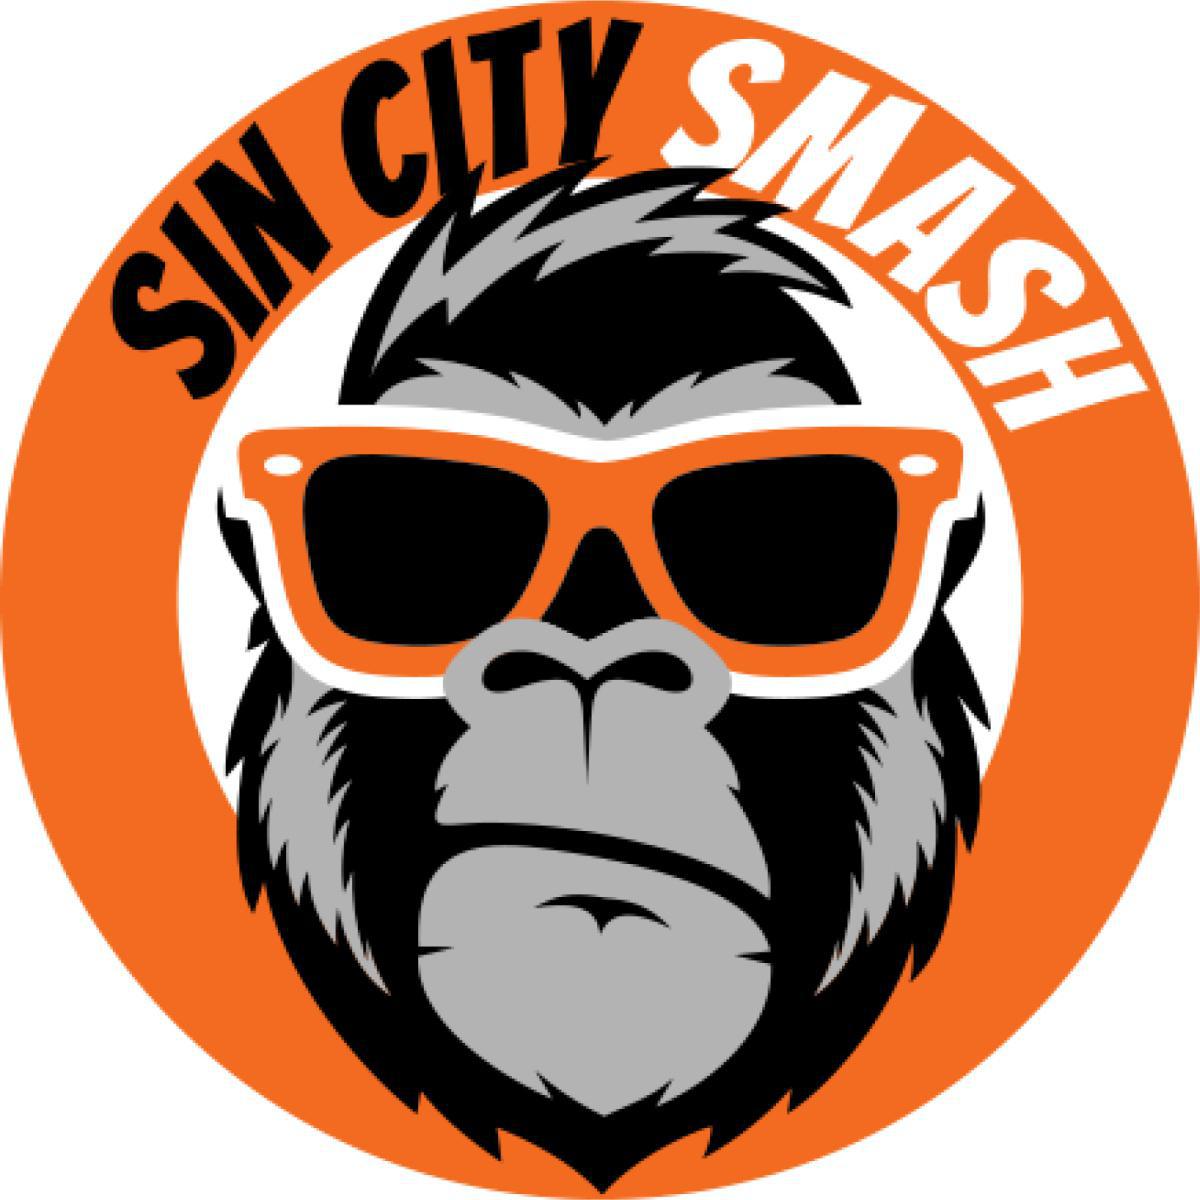 Grab Friends + Get Smashed at Sin City Smash by @vegasknowitall